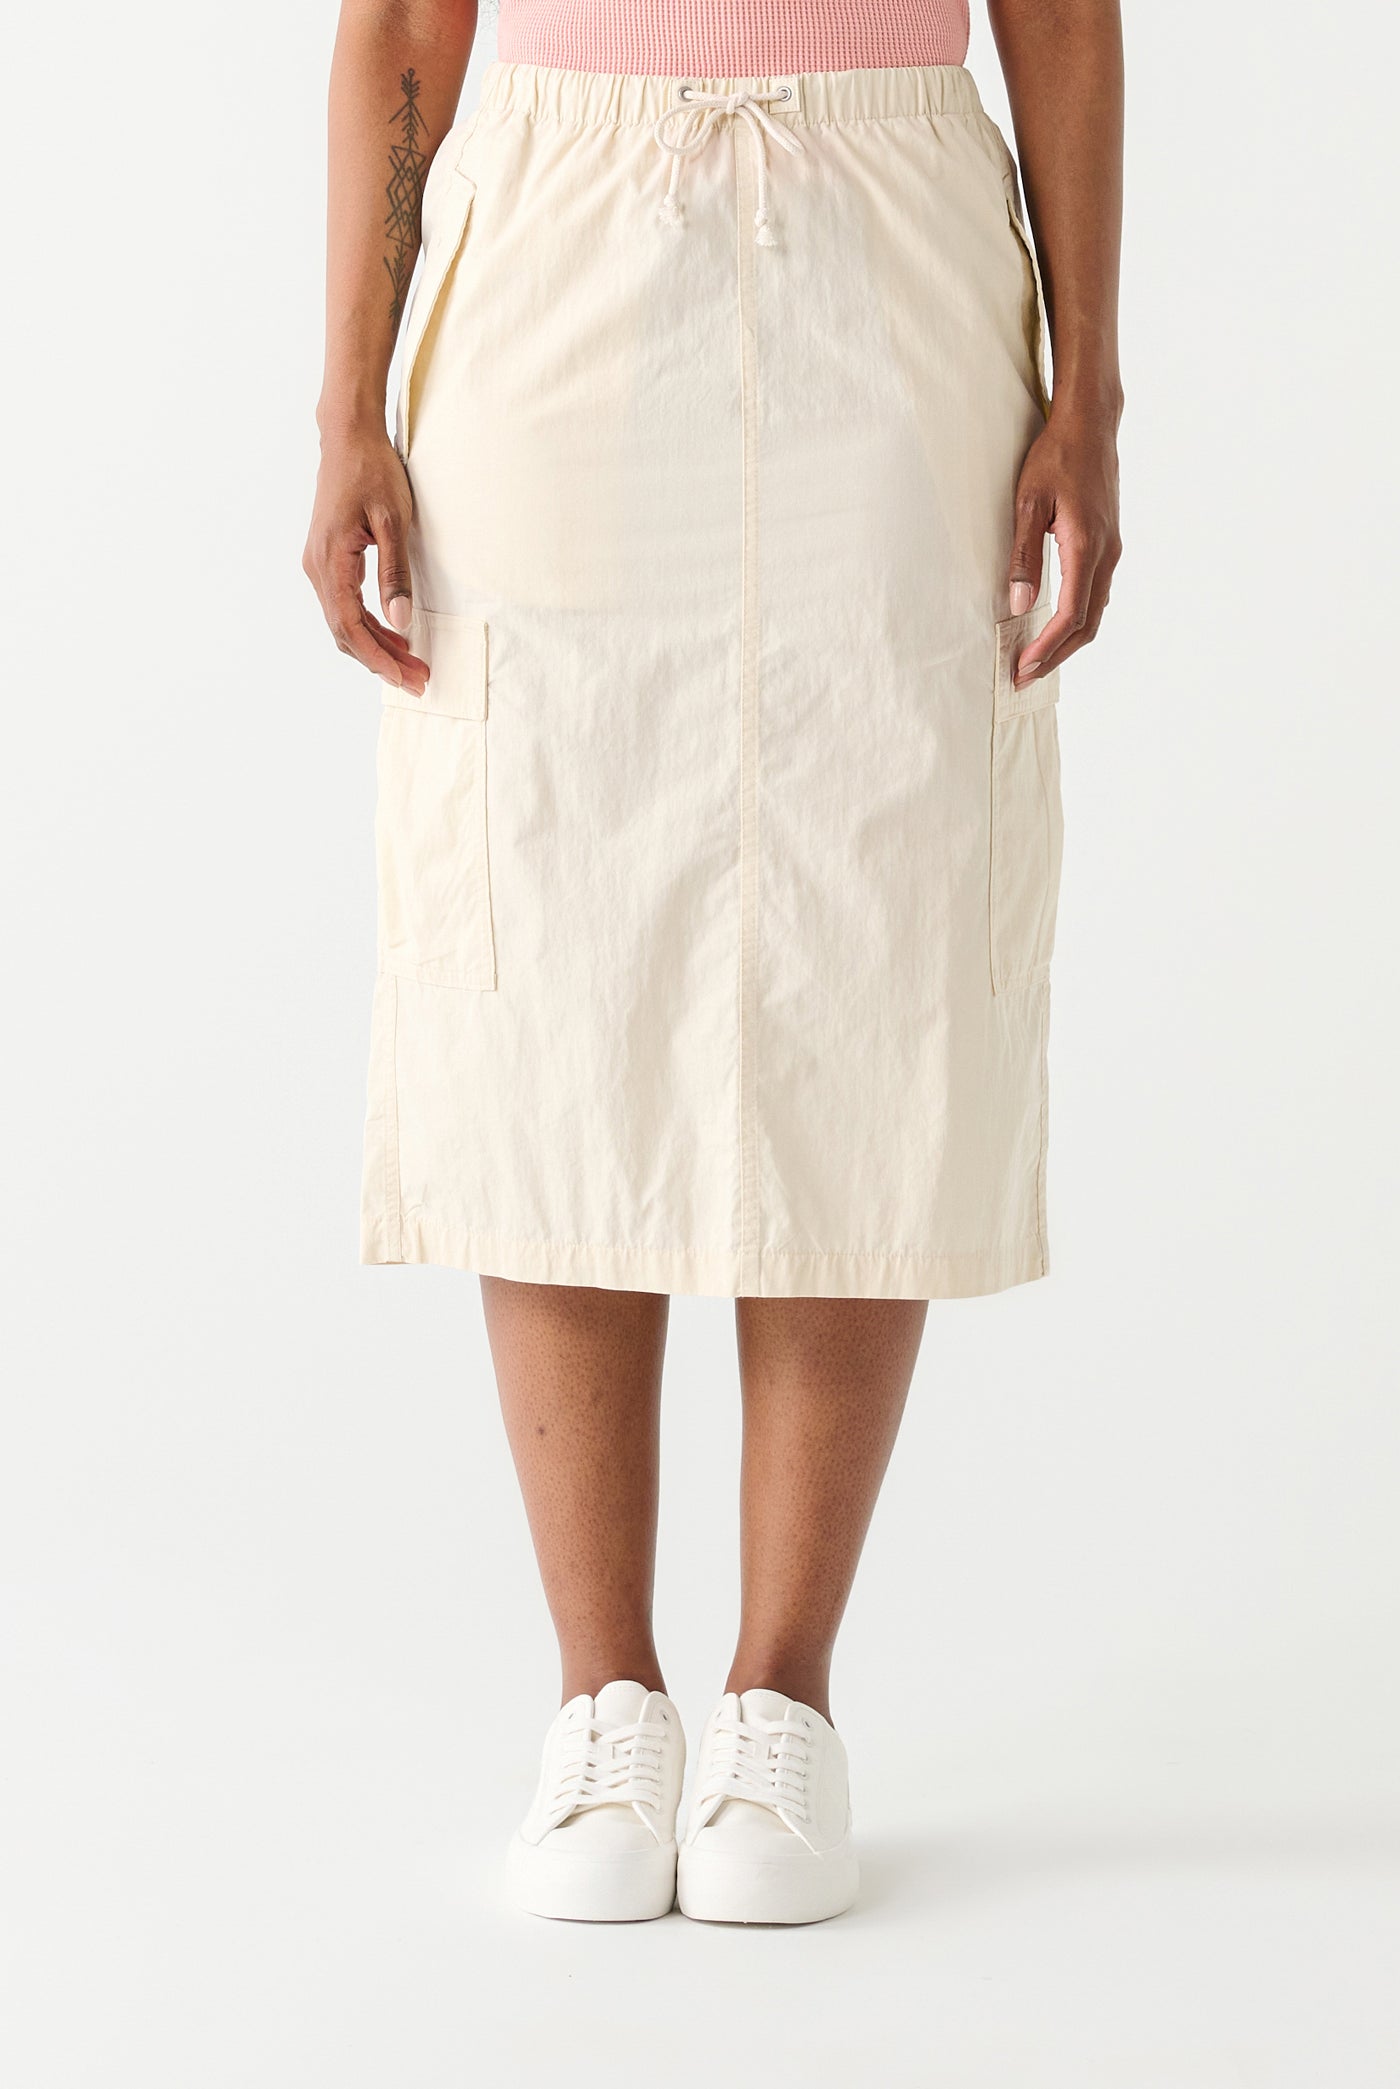 Zoe Parachute Cargo Skirt-Skirts-Vixen Collection, Day Spa and Women's Boutique Located in Seattle, Washington